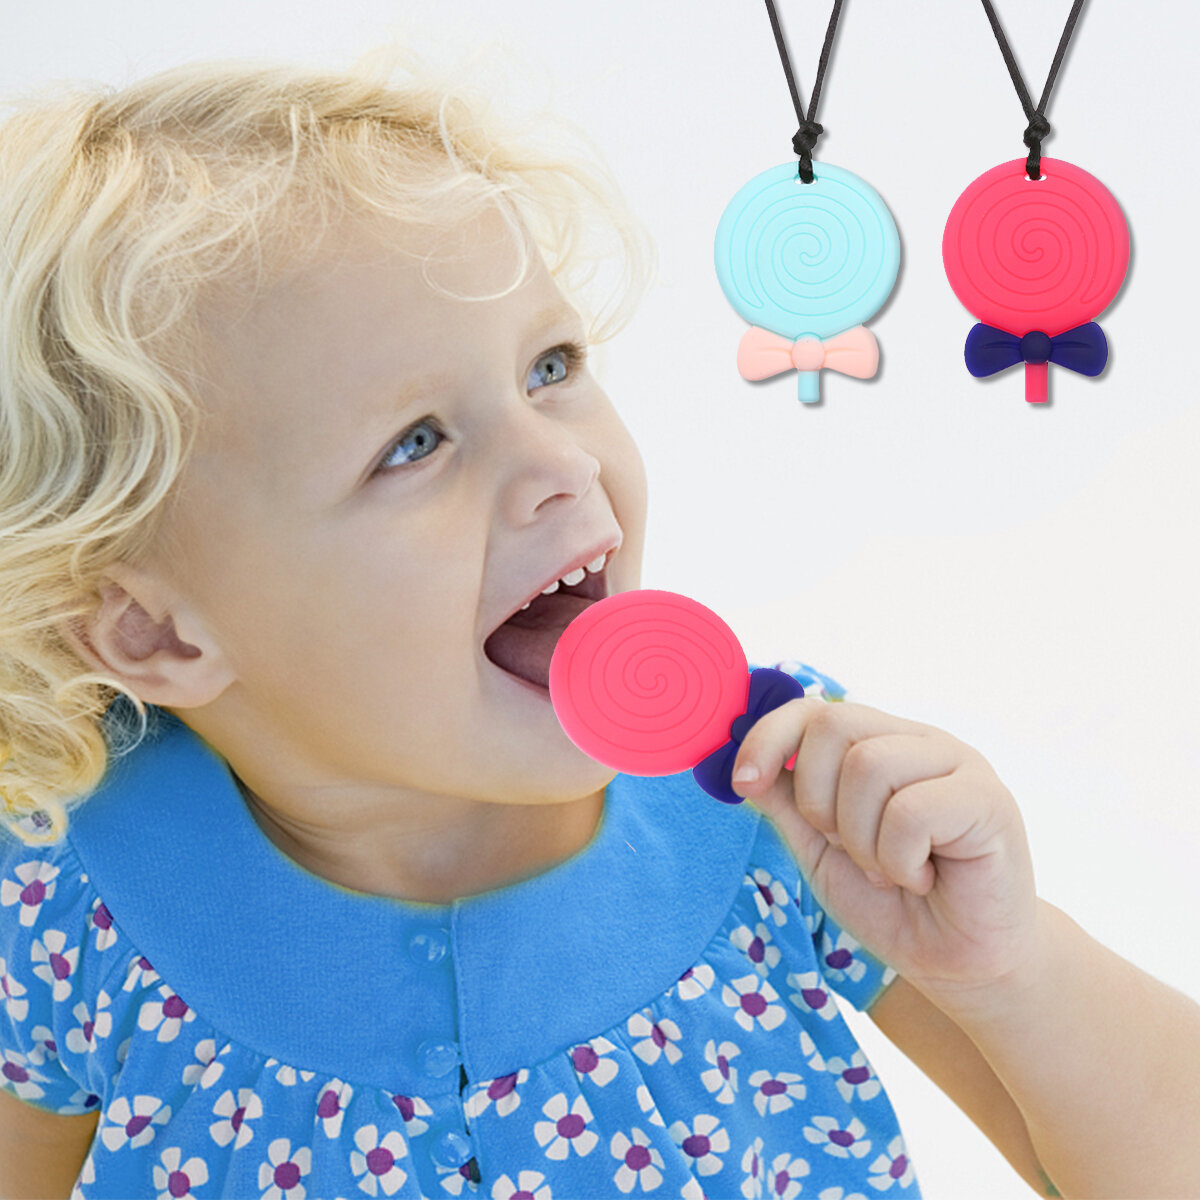 Lollipop Chewing Necklace 2 Pack Baby Playing Training